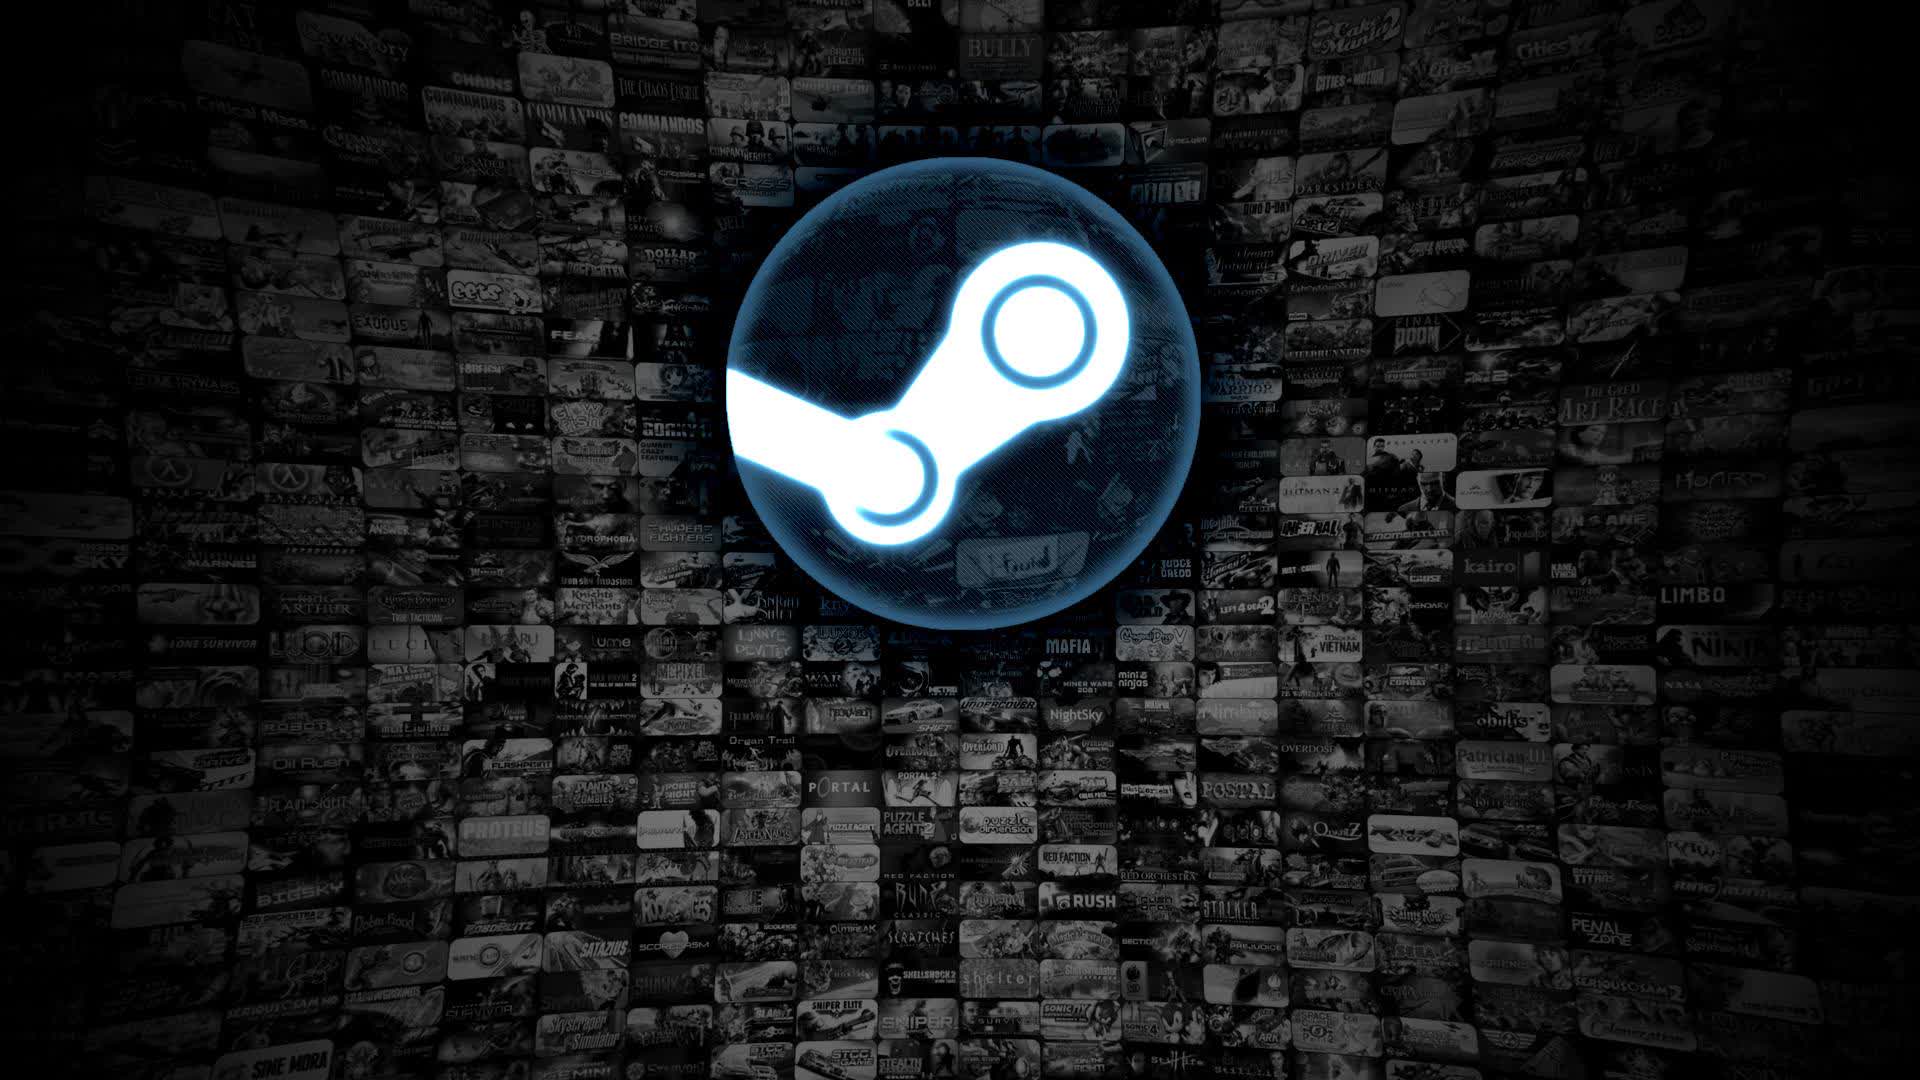 District court judge orders Valve to hand over Steam sales data to Apple